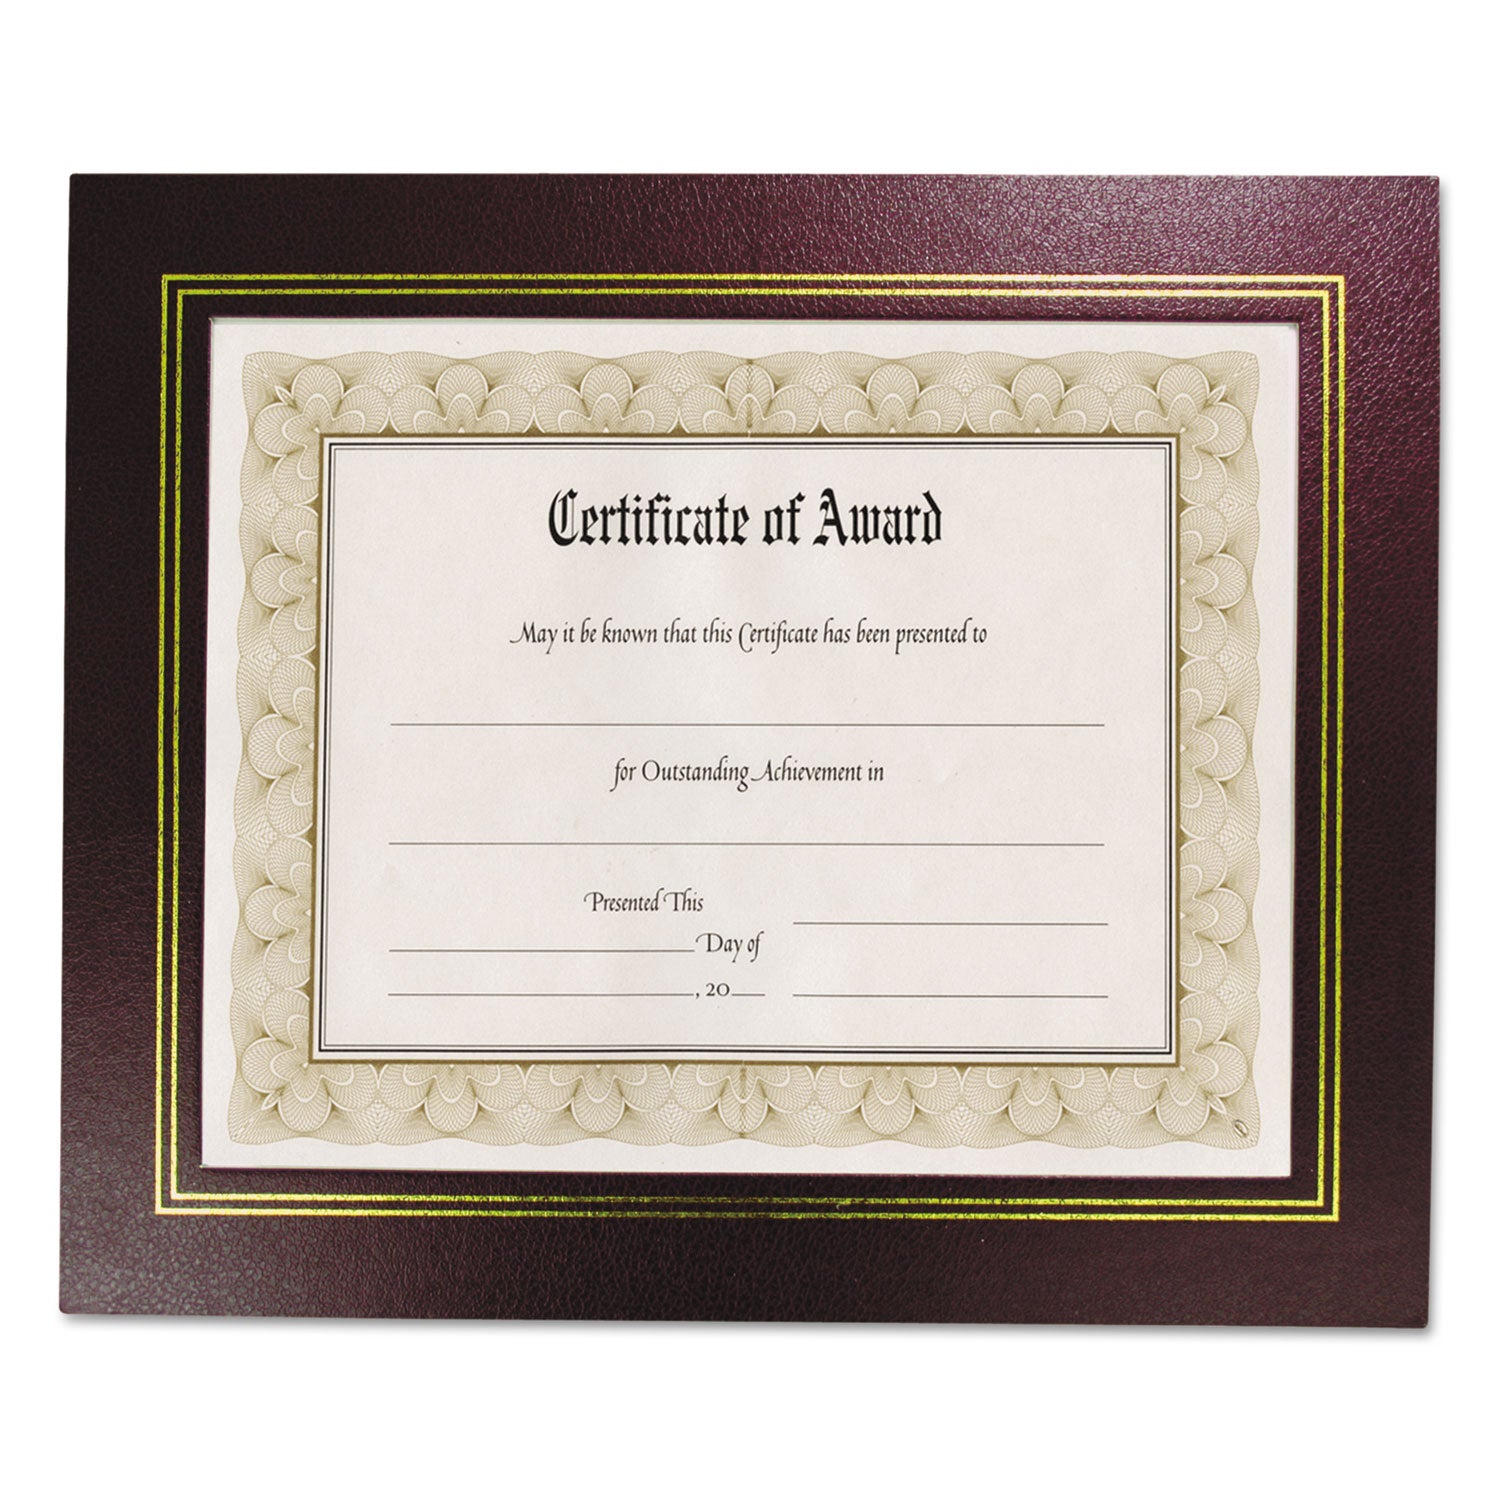 Leatherette Document Frame, 8.5 x 11, Burgundy, Pack of Two - 